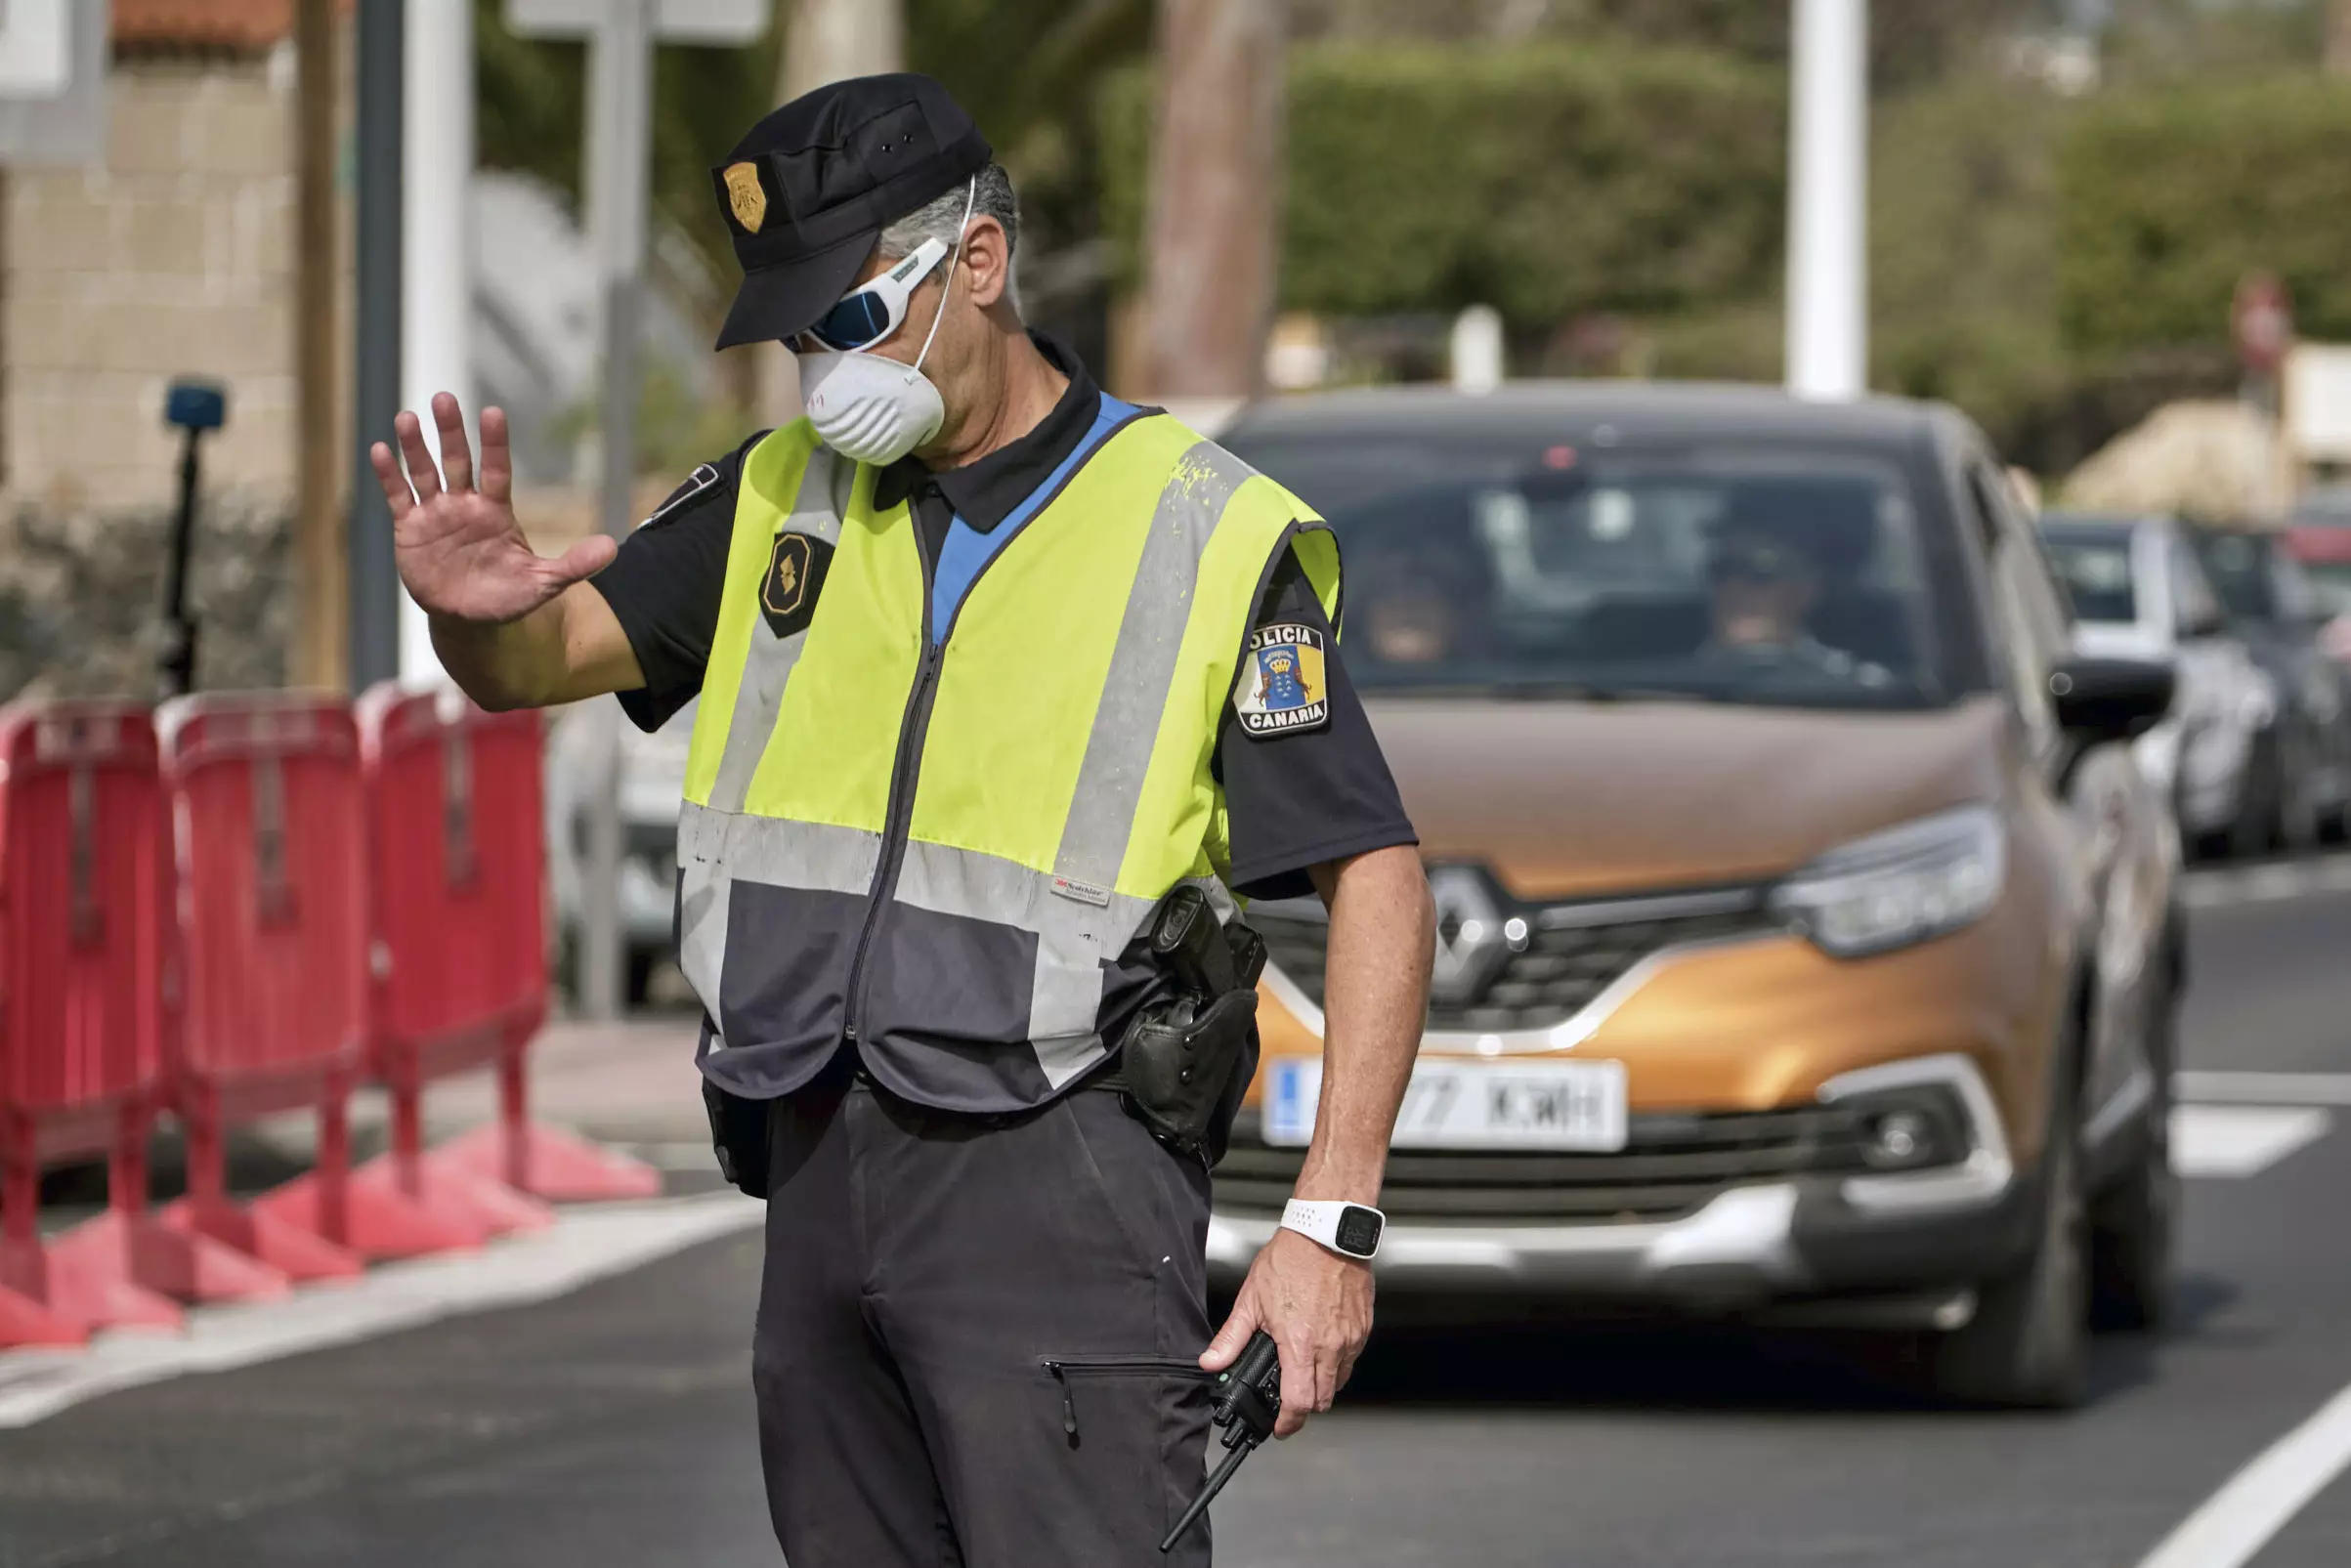 A police officer controls the road to the H10 Costa Adeje Palace hotel in Tenerife.